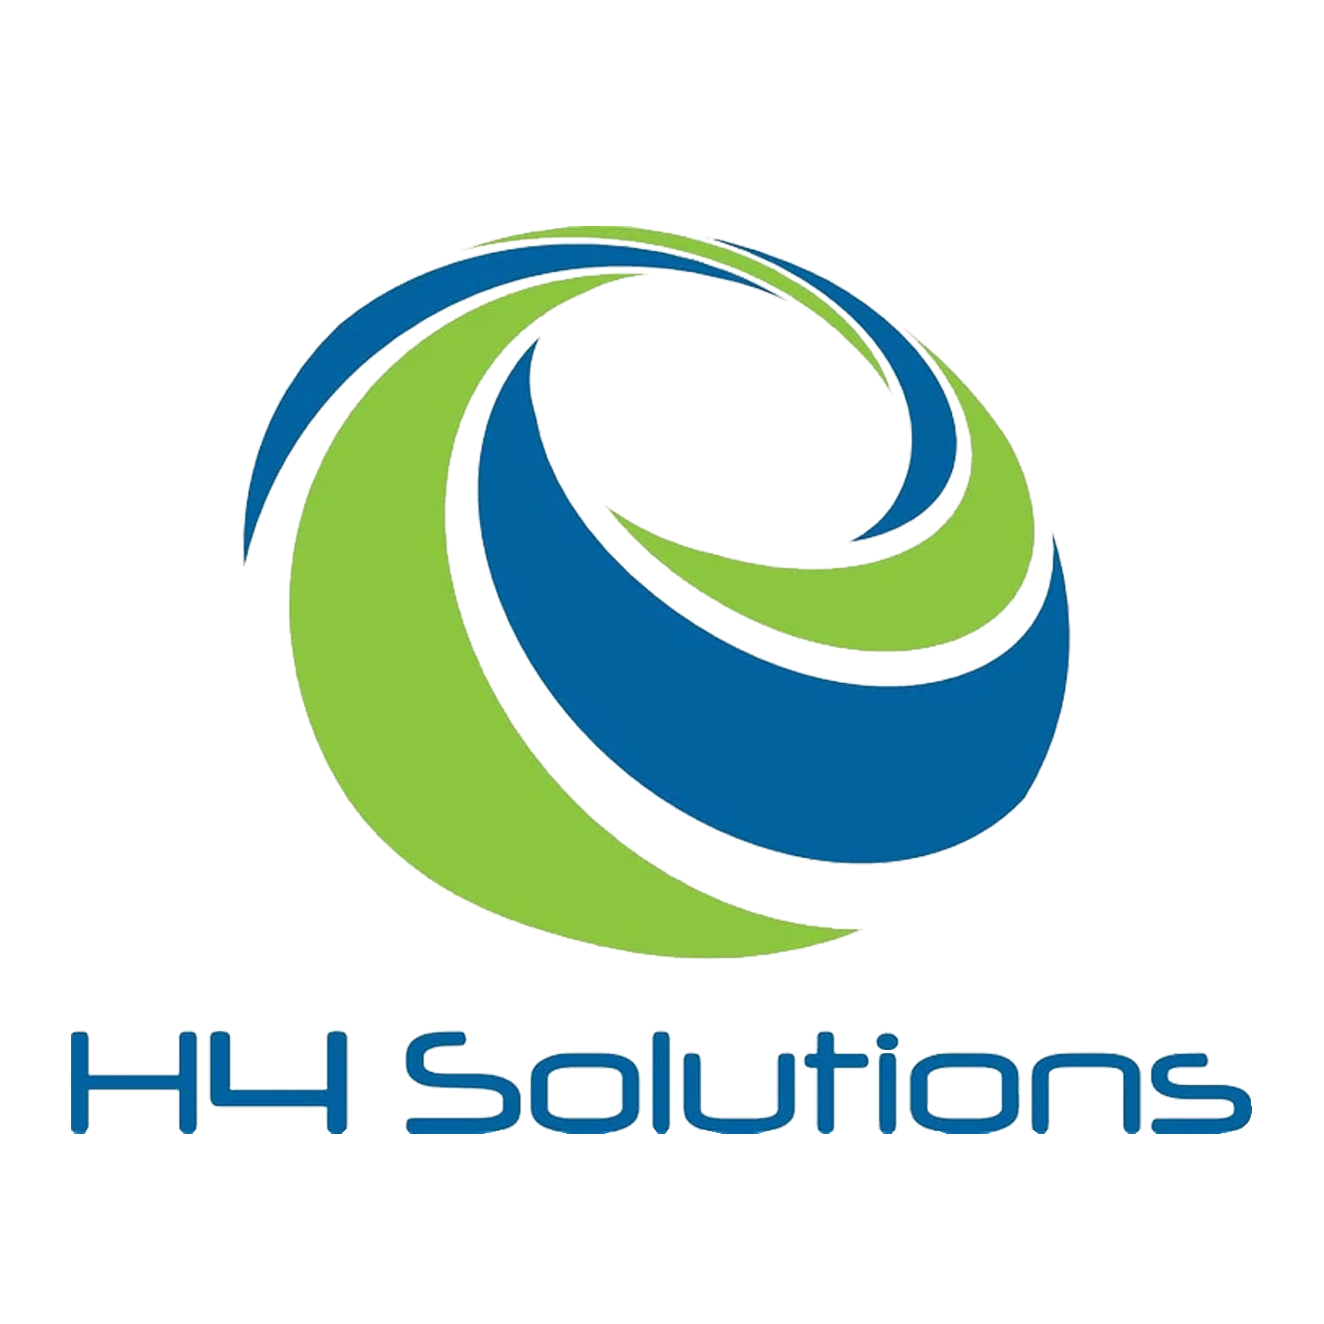 H4 Solutions